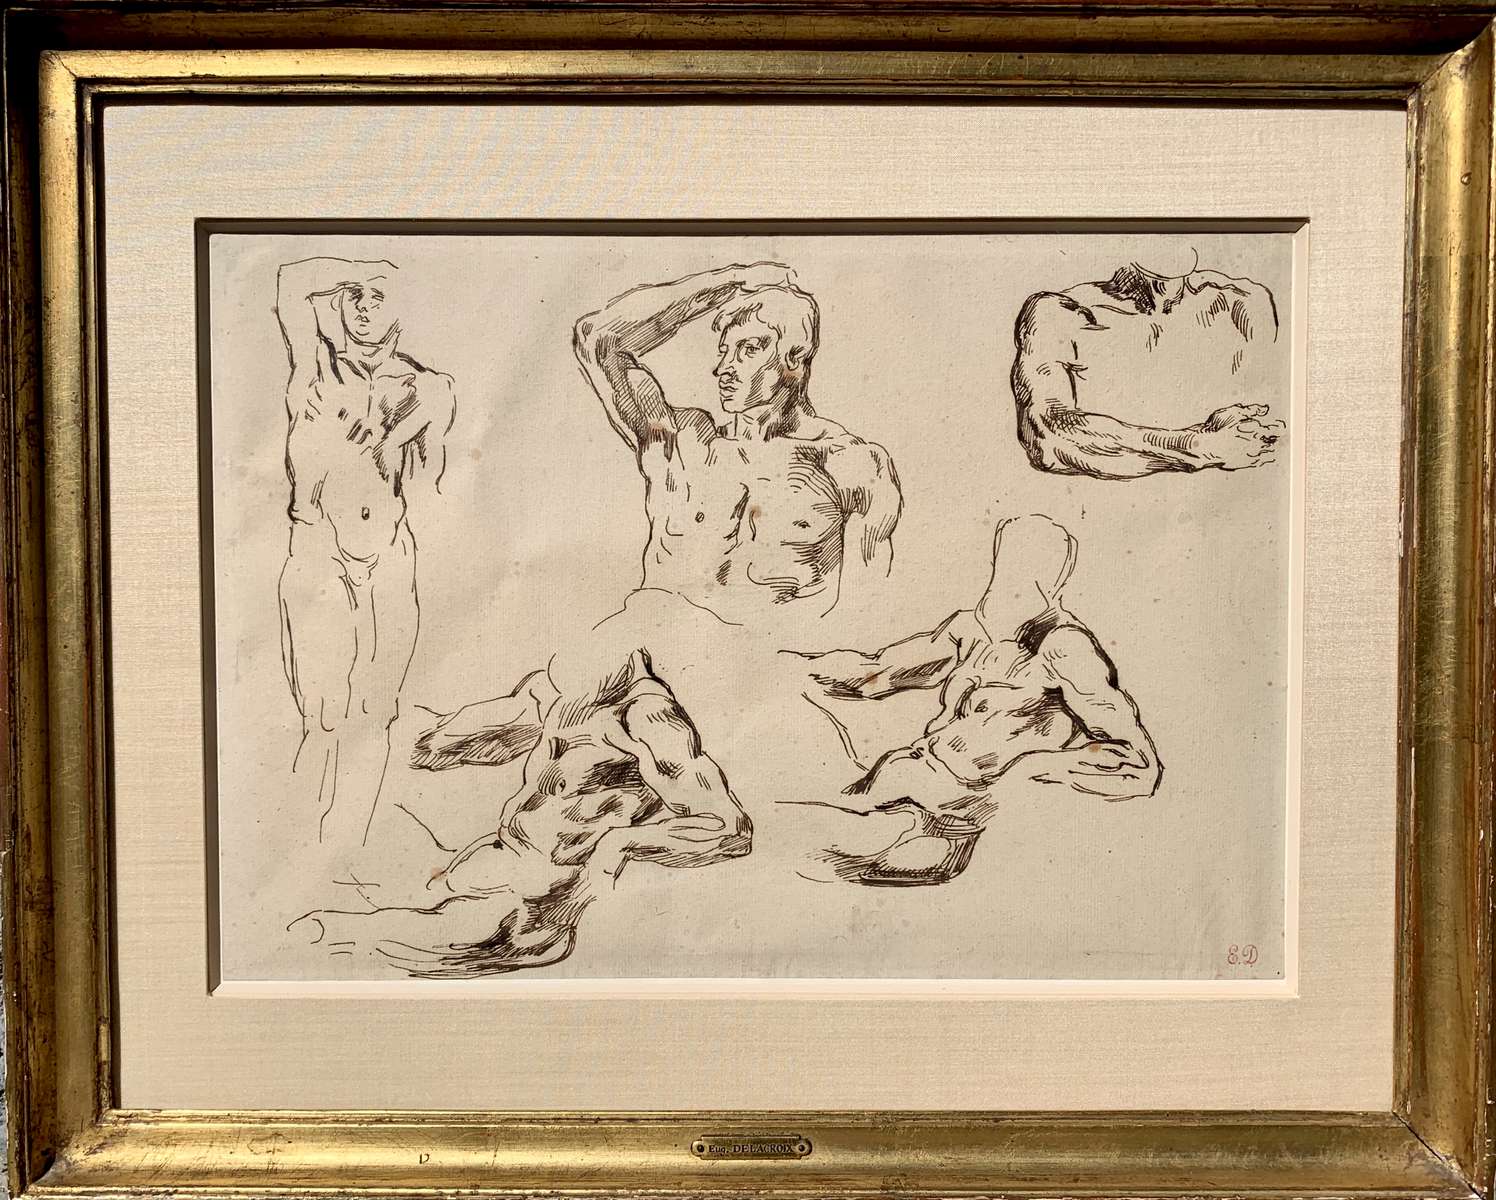 Eugène DELACROIX (1798 - 1863)Brown ink on paper9 1/2 x 13 3/8 in (24 x 34 cm)Stamped with Delacroix estate mark LUGT 838a in red ink lower rightPlease click HERE for full fact sheet